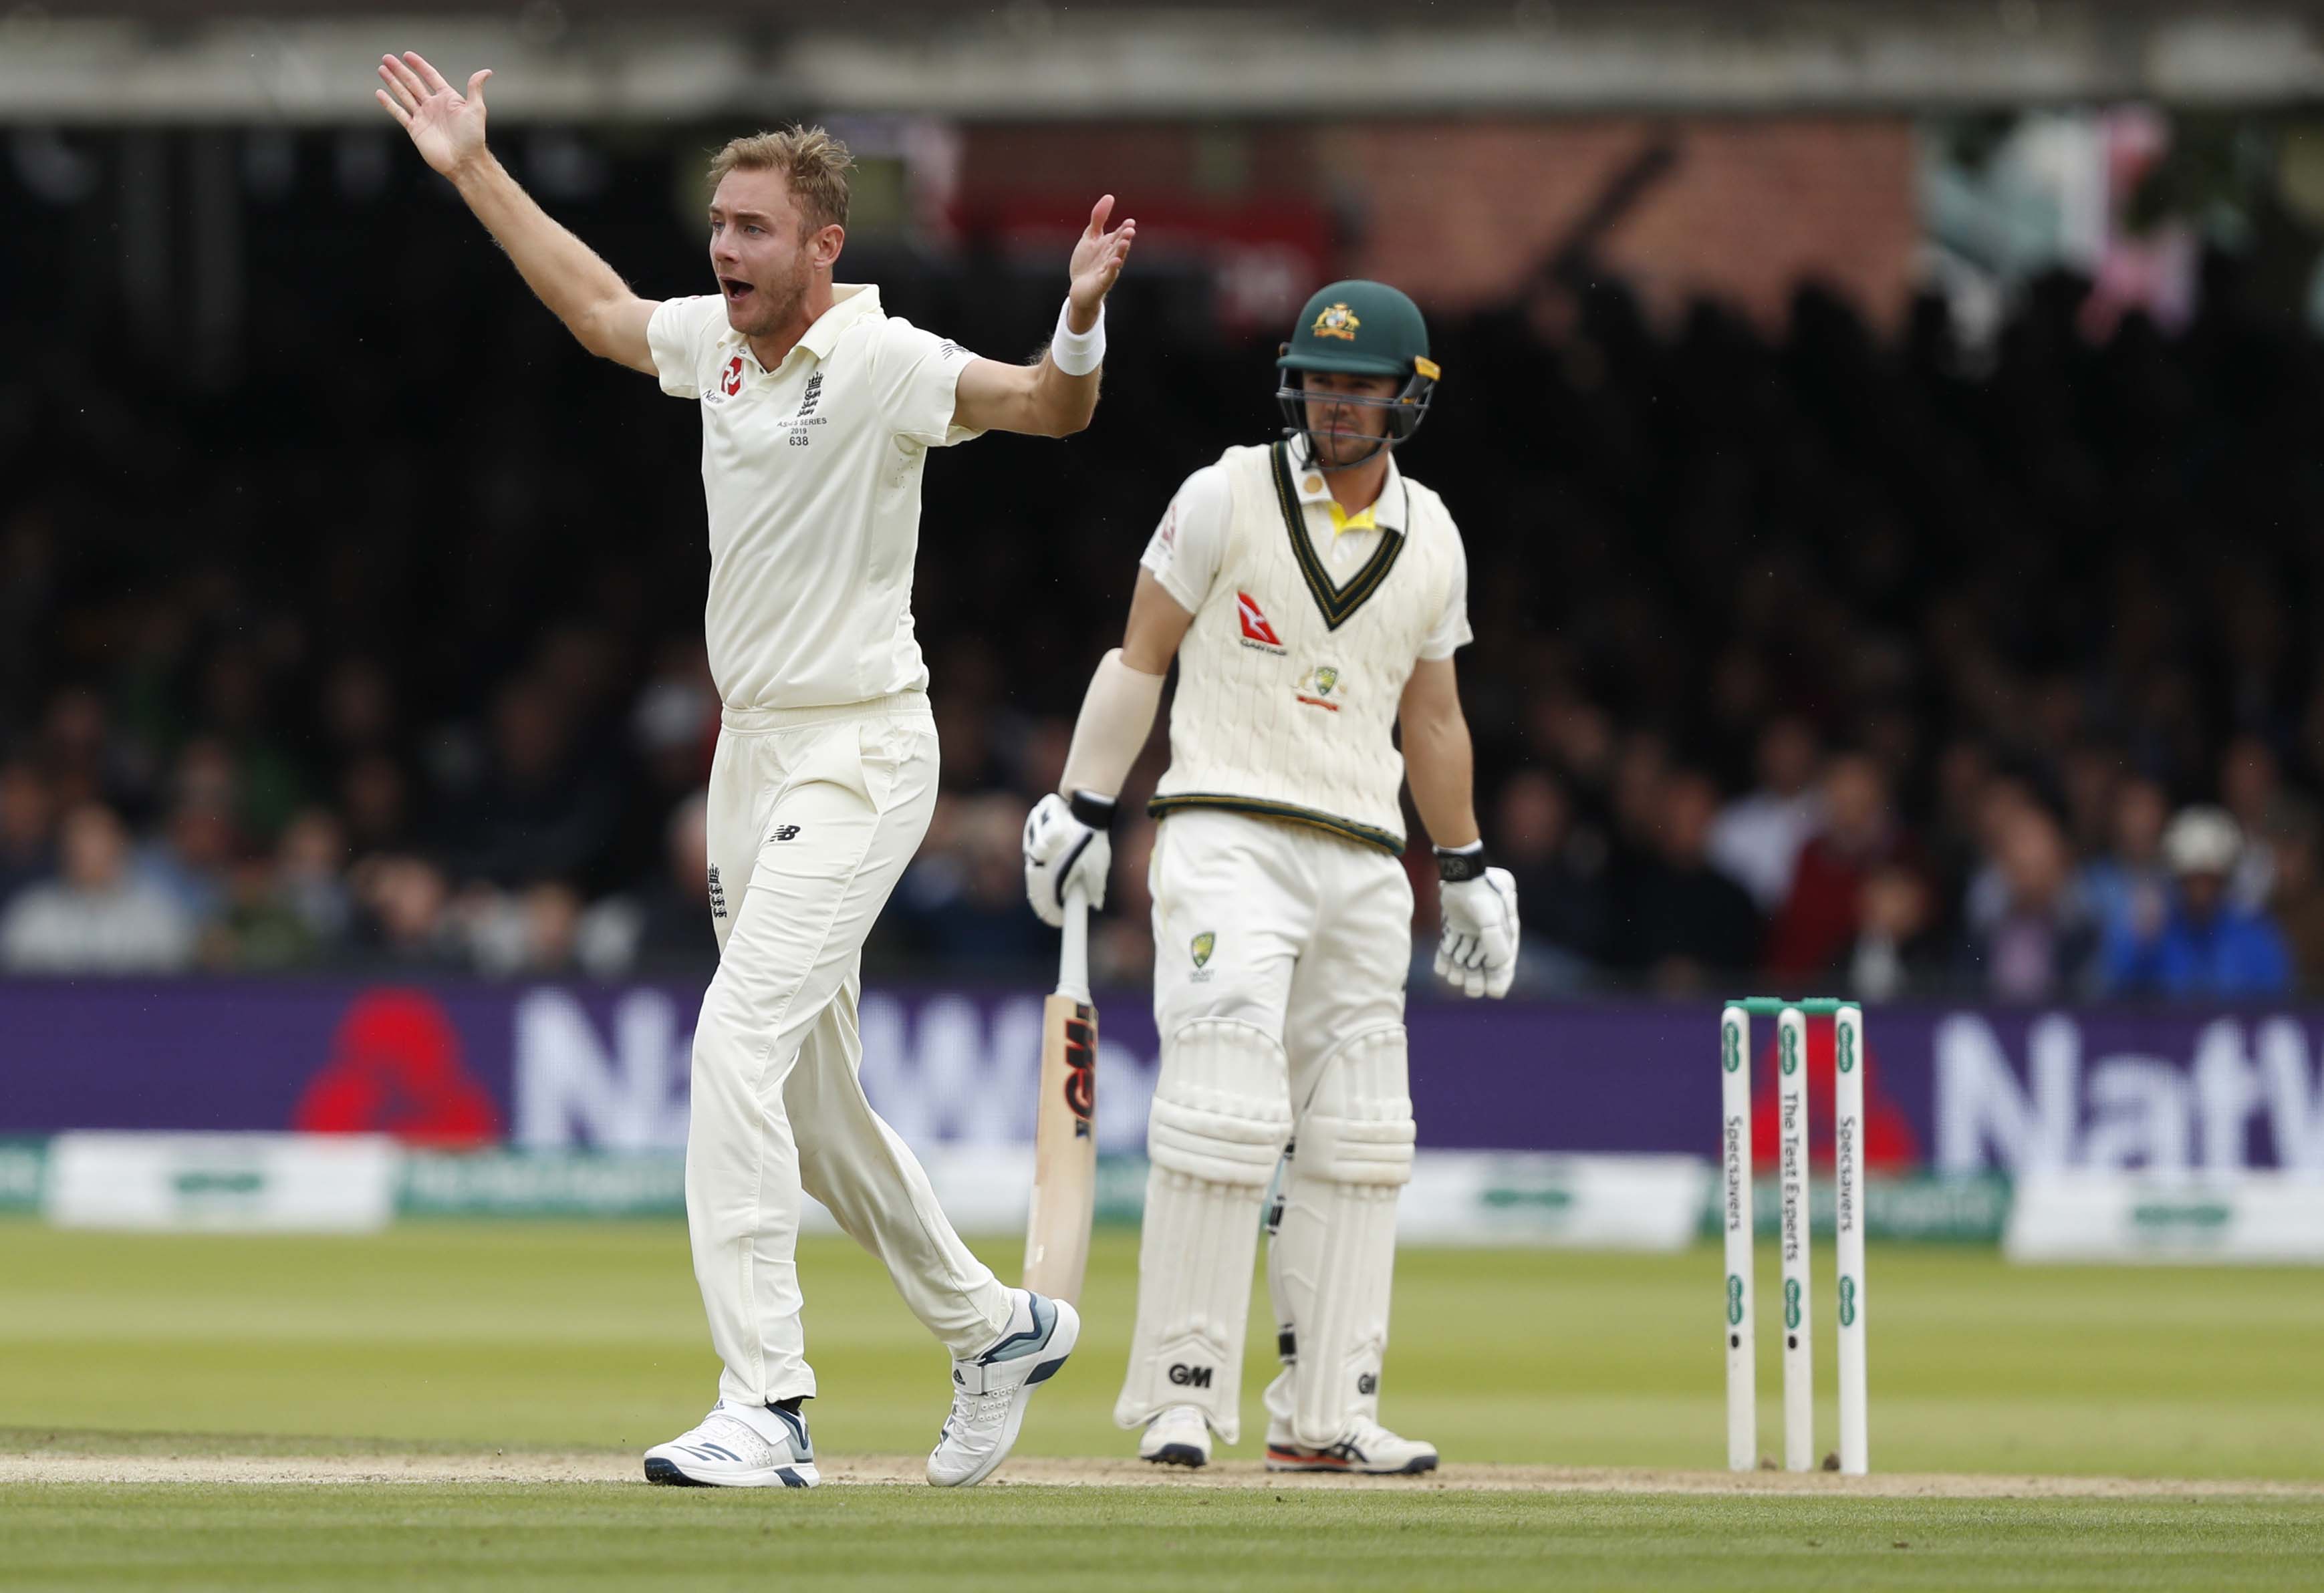 Pat Cummins, England, Australia, Steve Smith, Ashes series, Ashes test, second test, Peter Siddle, Chris Woakes, Cricket, english news website, The Federal